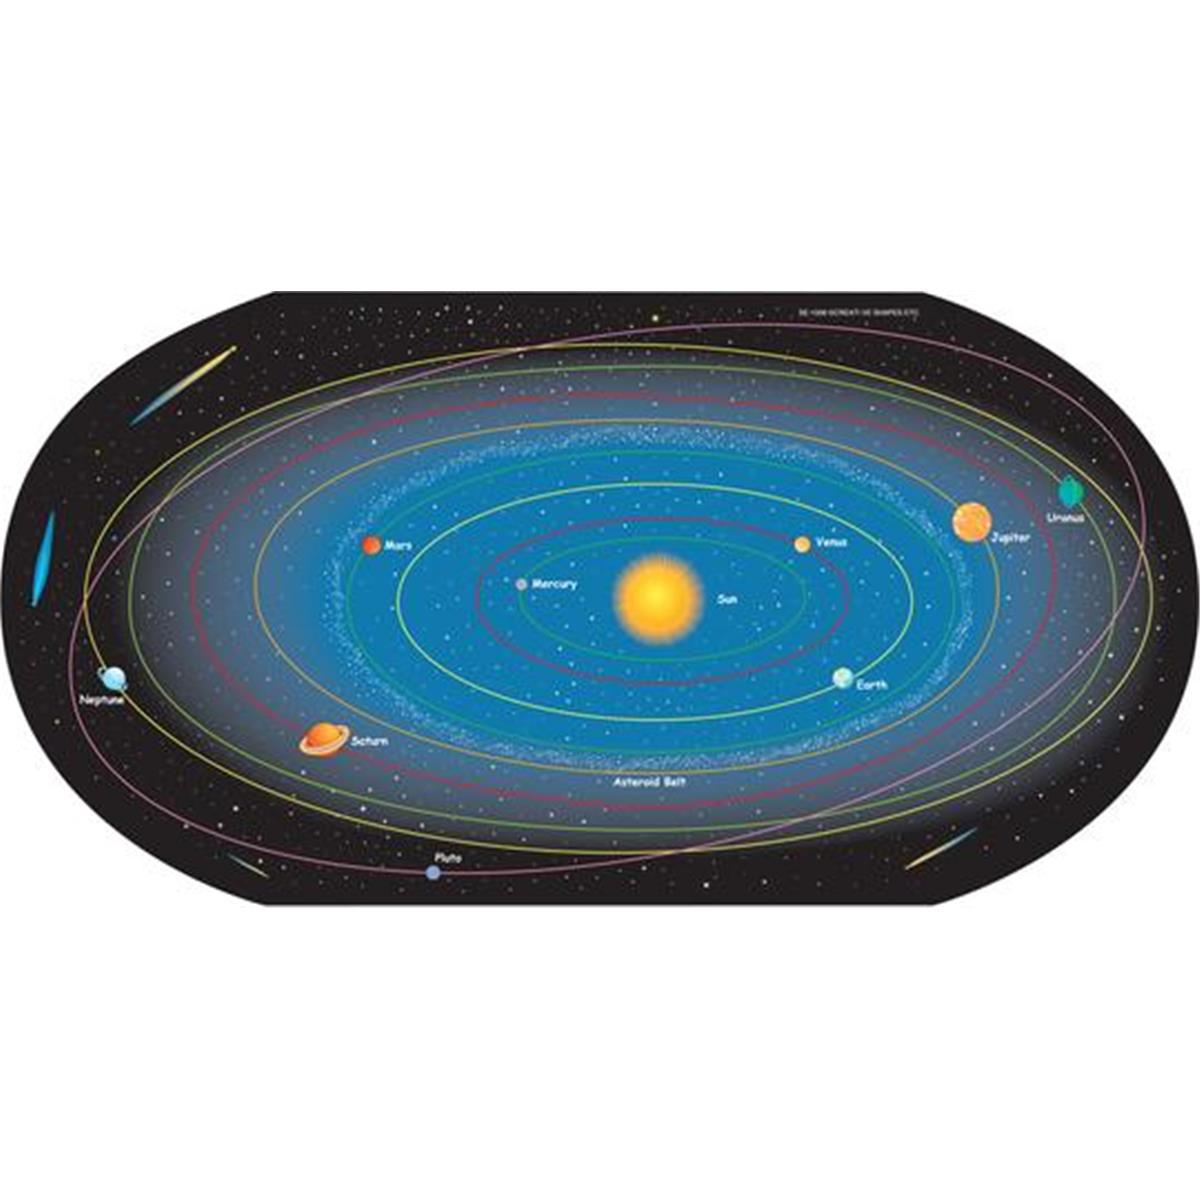 Picture of Creative Shapes Etc SE-1008 9 x 16 in. Practice Map, Solar System Labeled - 30 Sheets per Pack